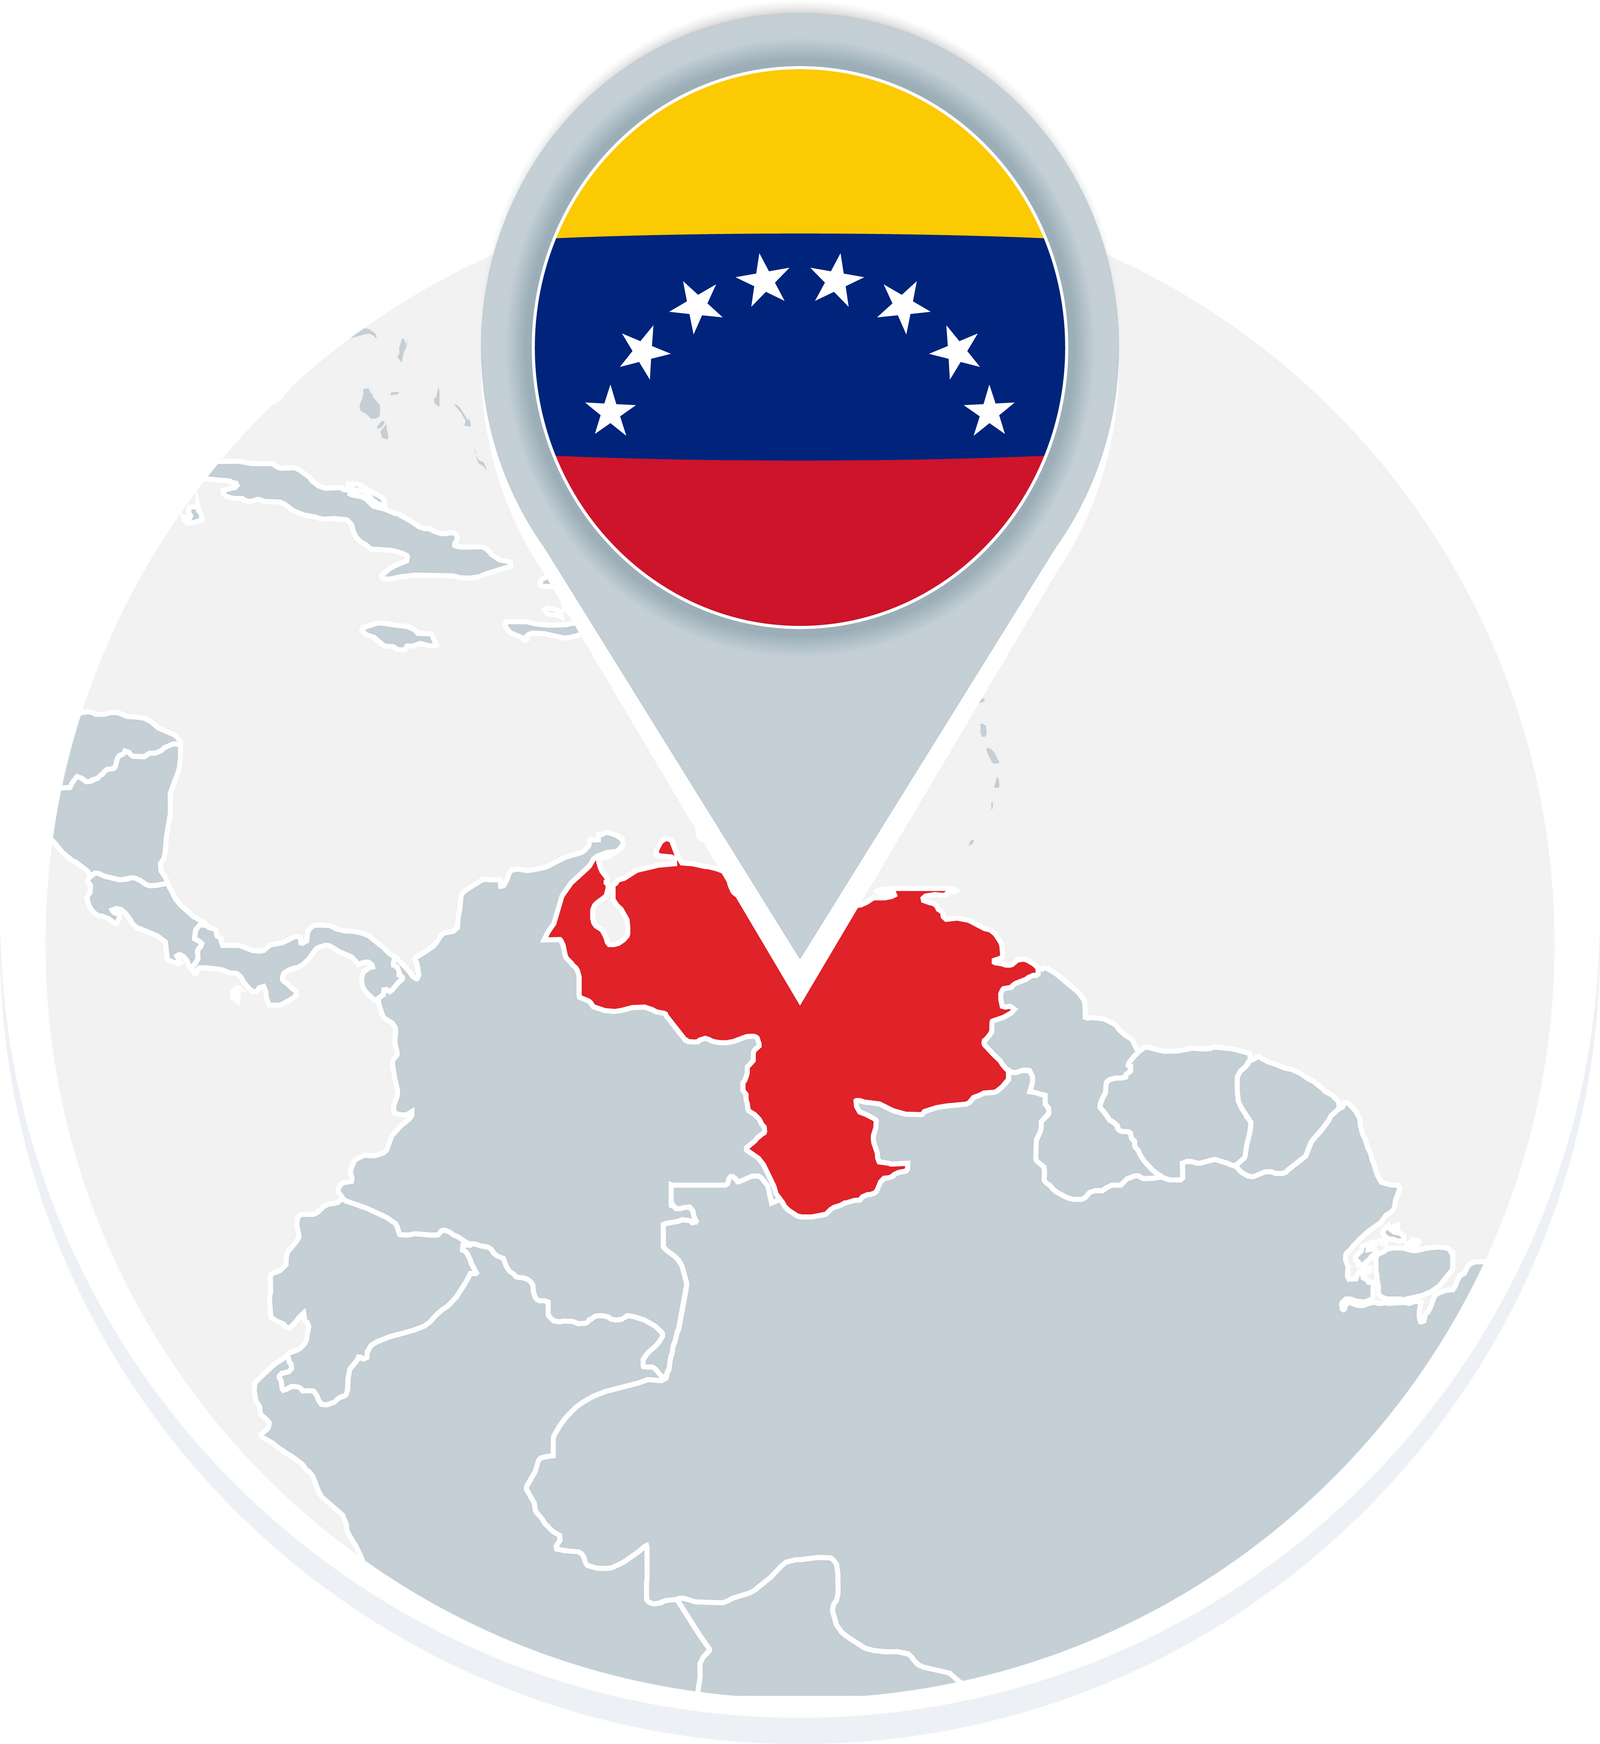 Venezuela map and flag, map icon with highlighted Venezuela